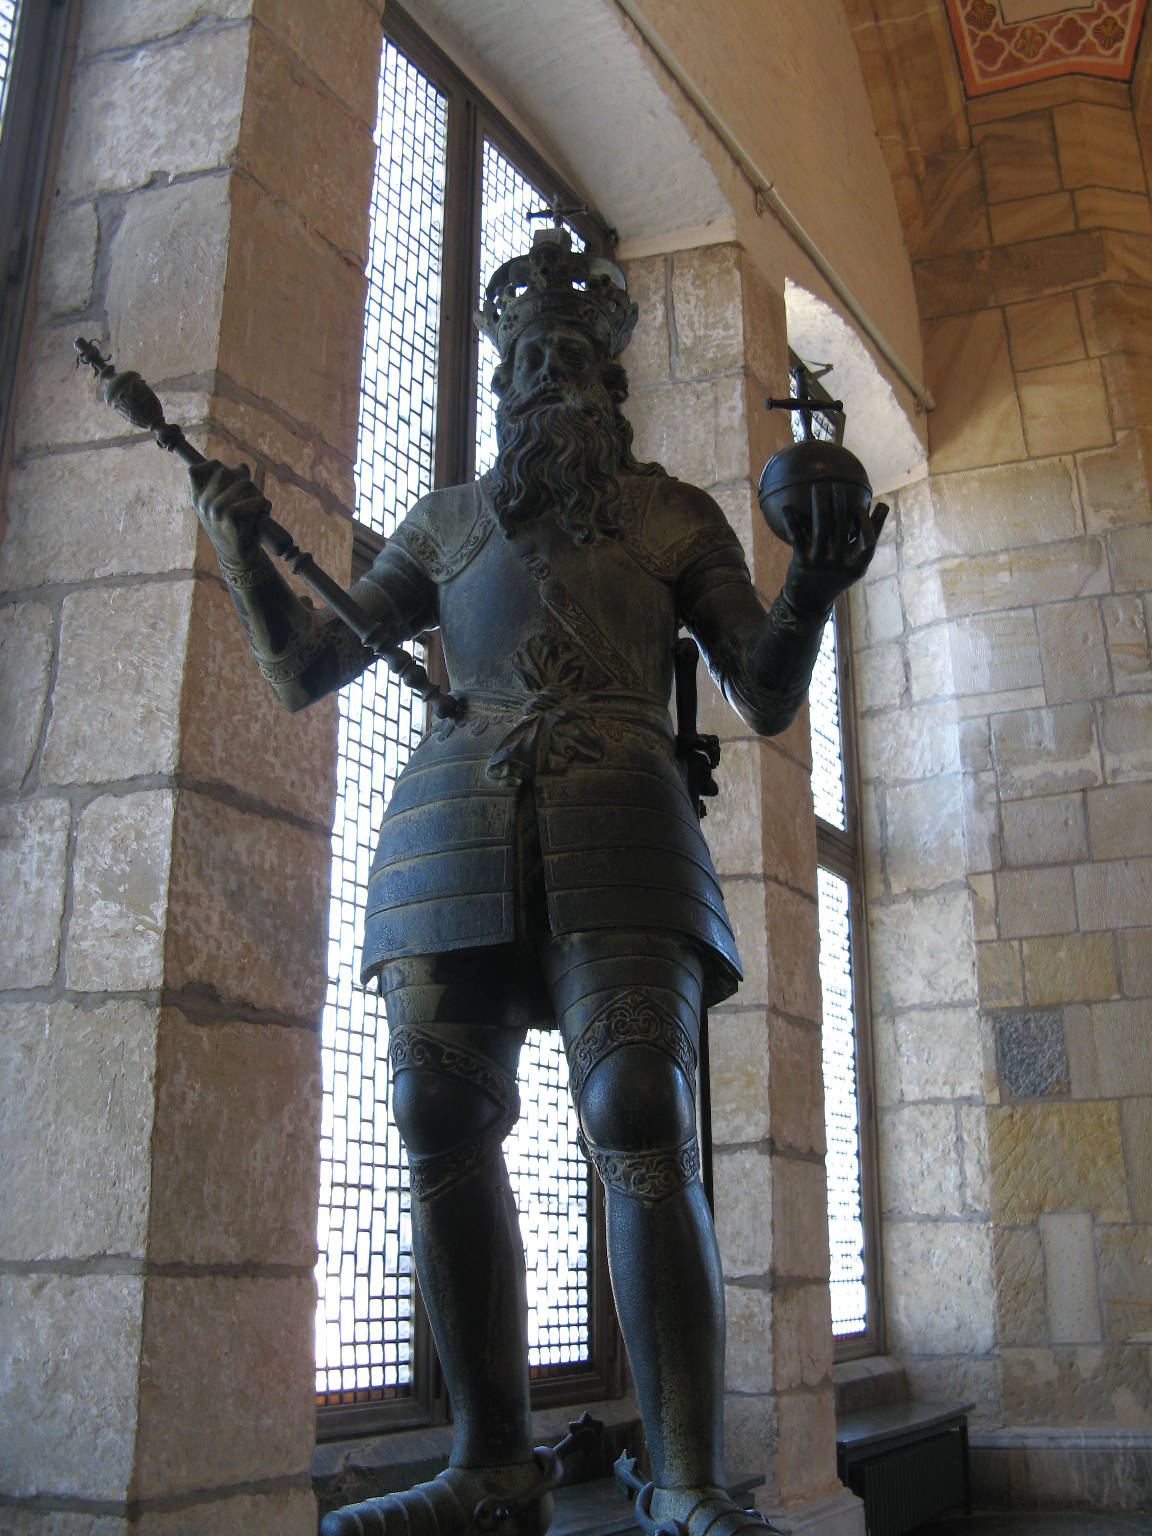 A statue of the emperor Charlemagne